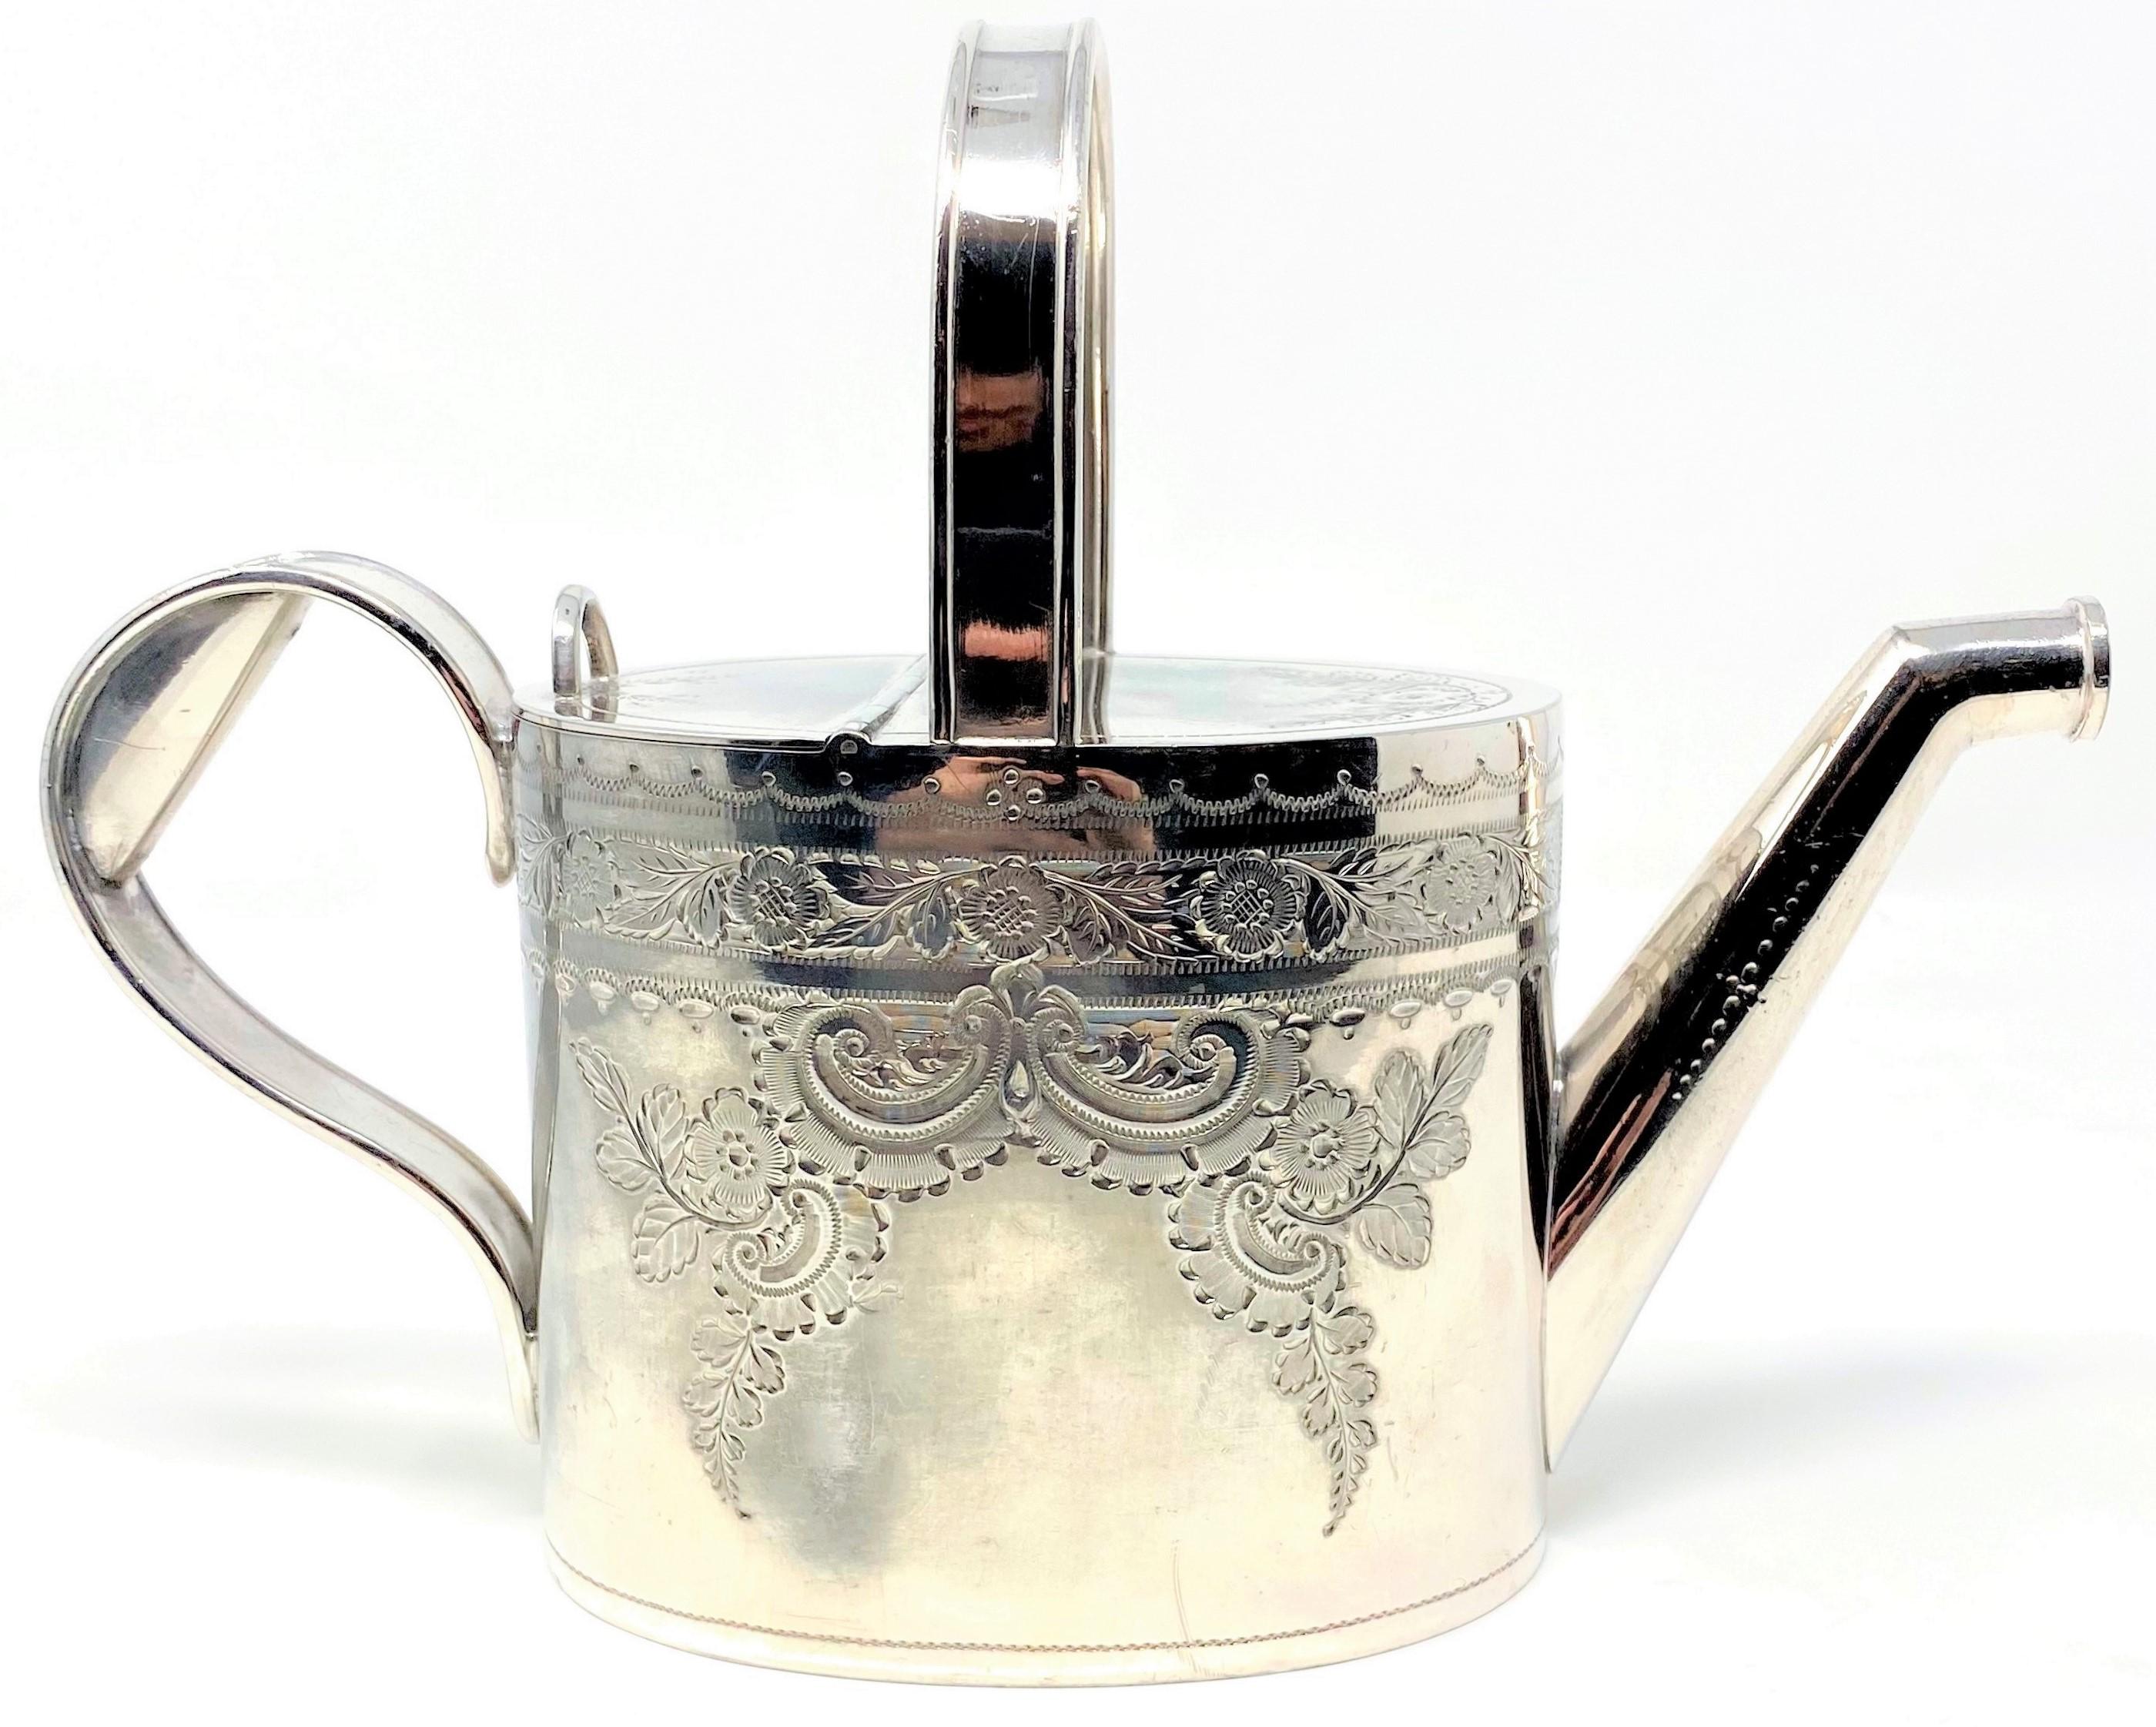 Small antique English Edwardian Sheffield silver plated and hand engraved watering can, circa 1910.